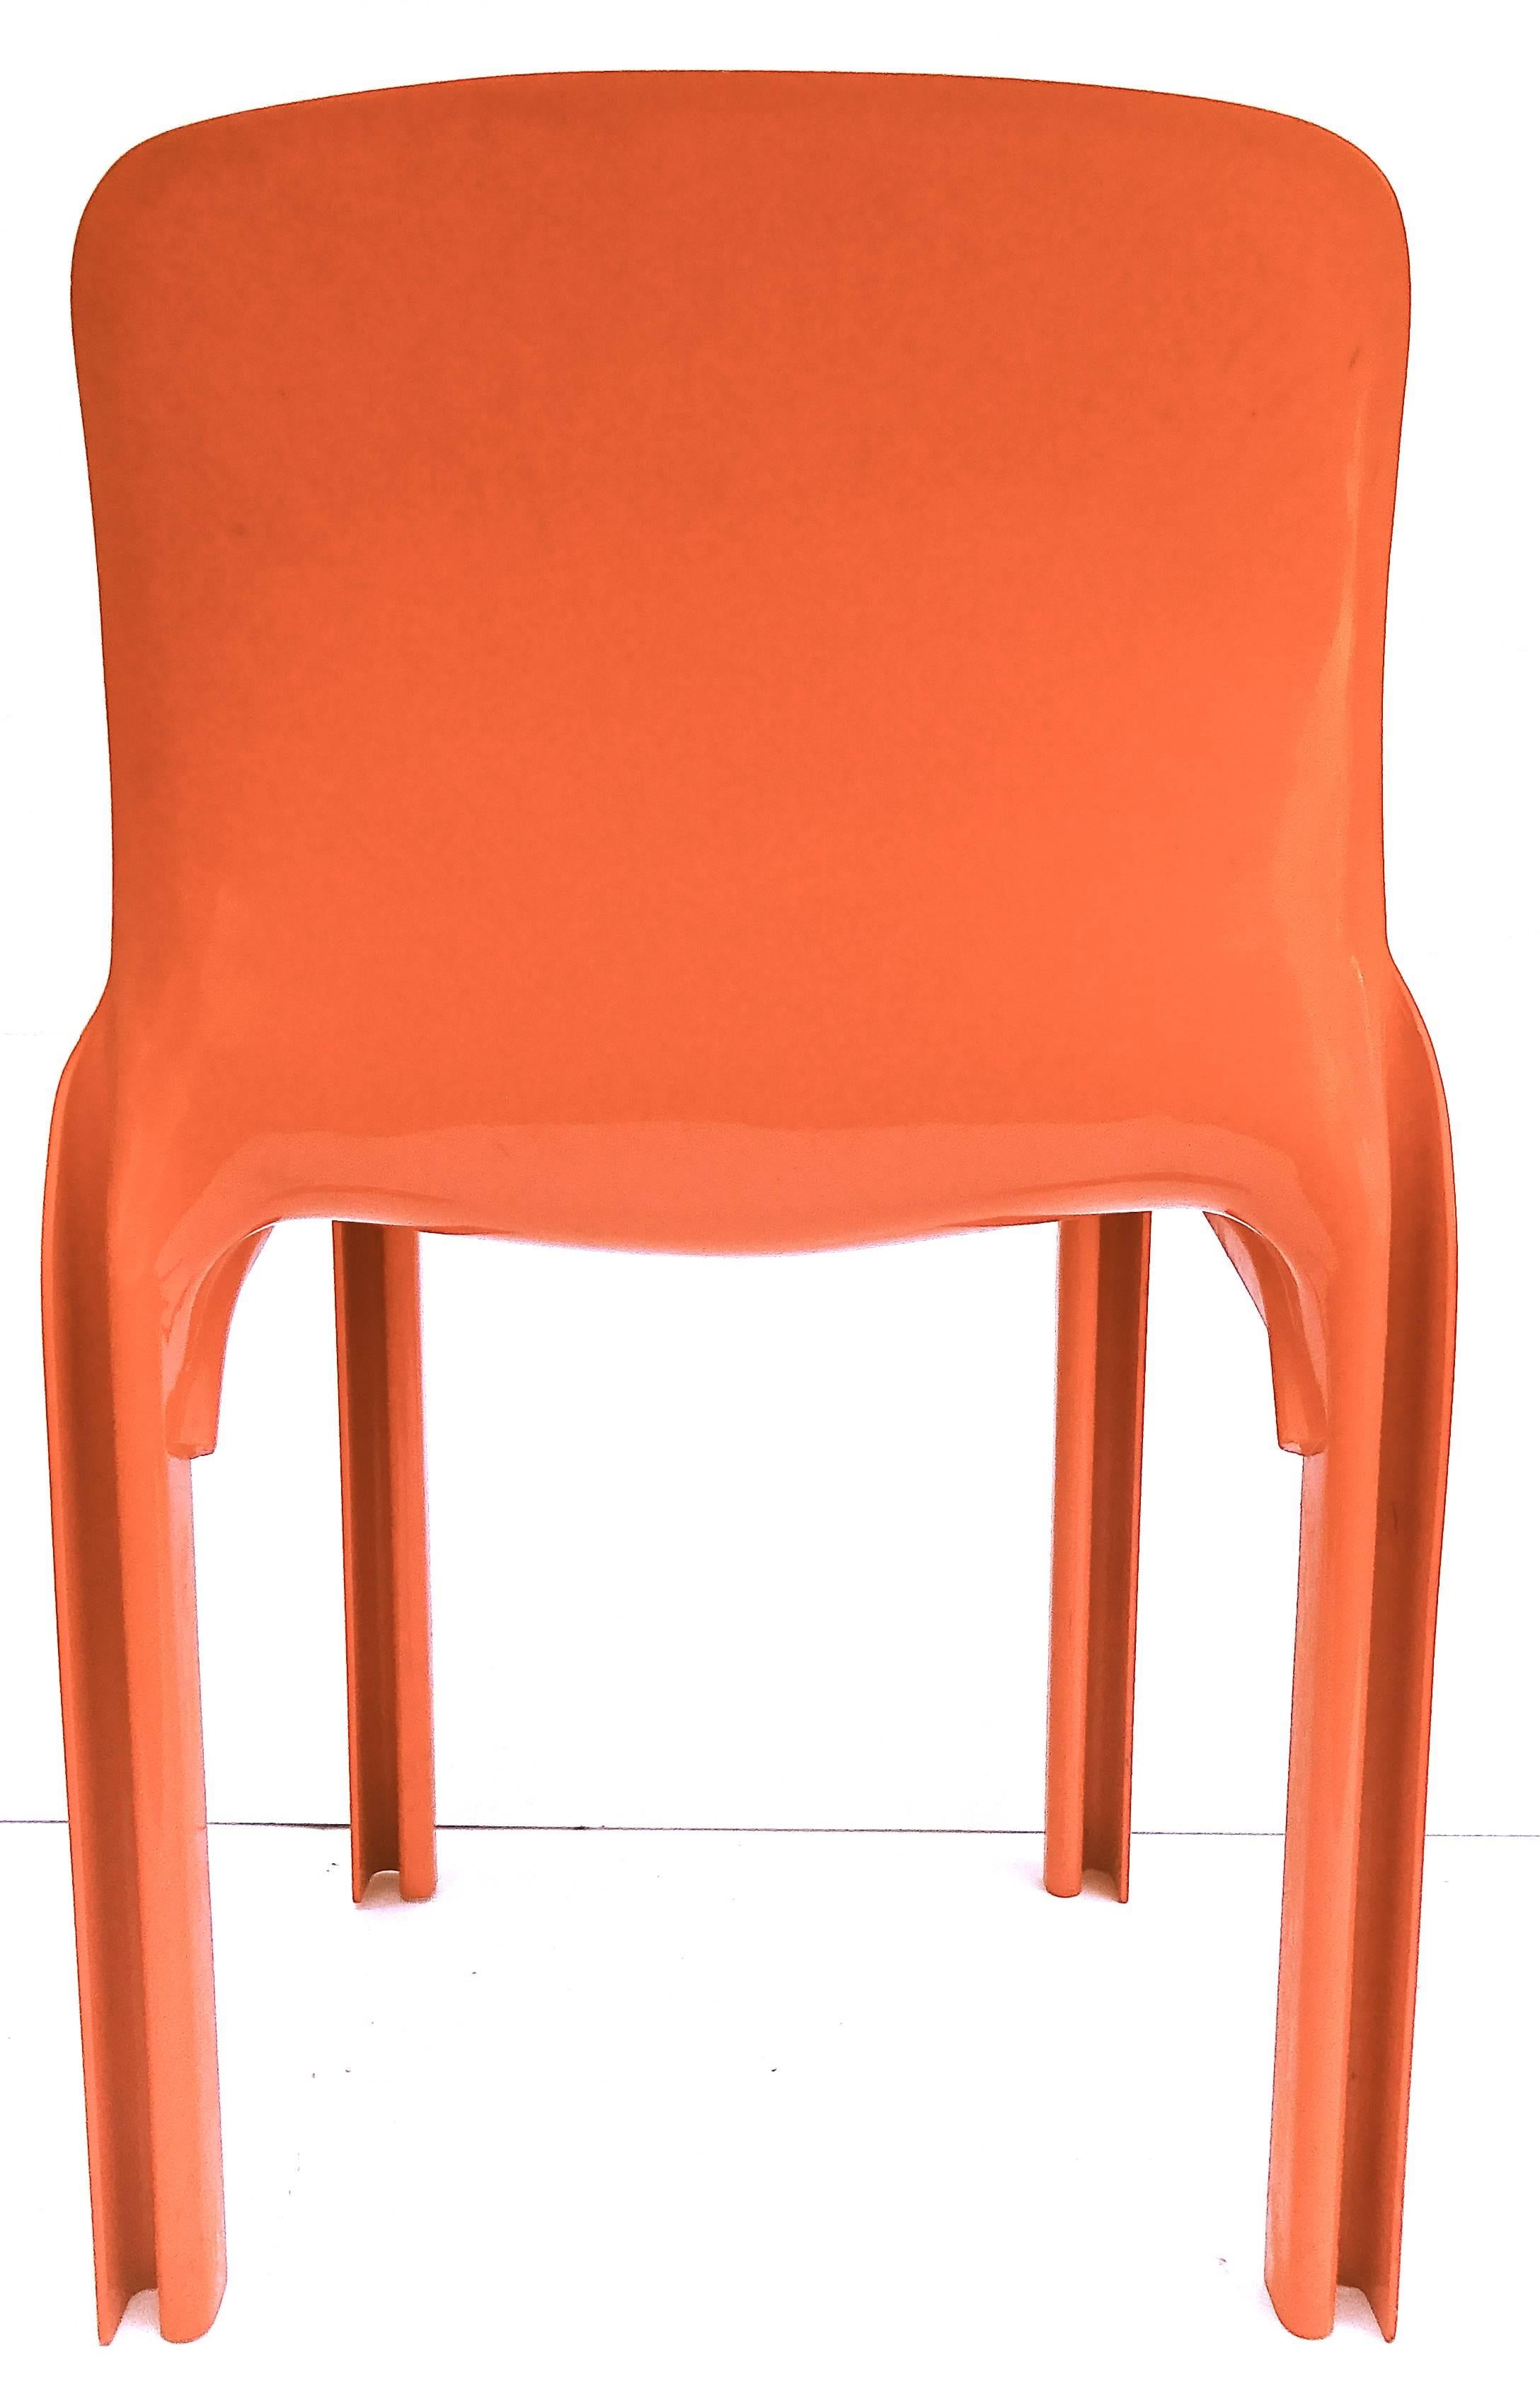 Late 20th Century Vibrant Set of Four Vico Magistretti Italian Plastic Dining Chairs, 1970s For Sale